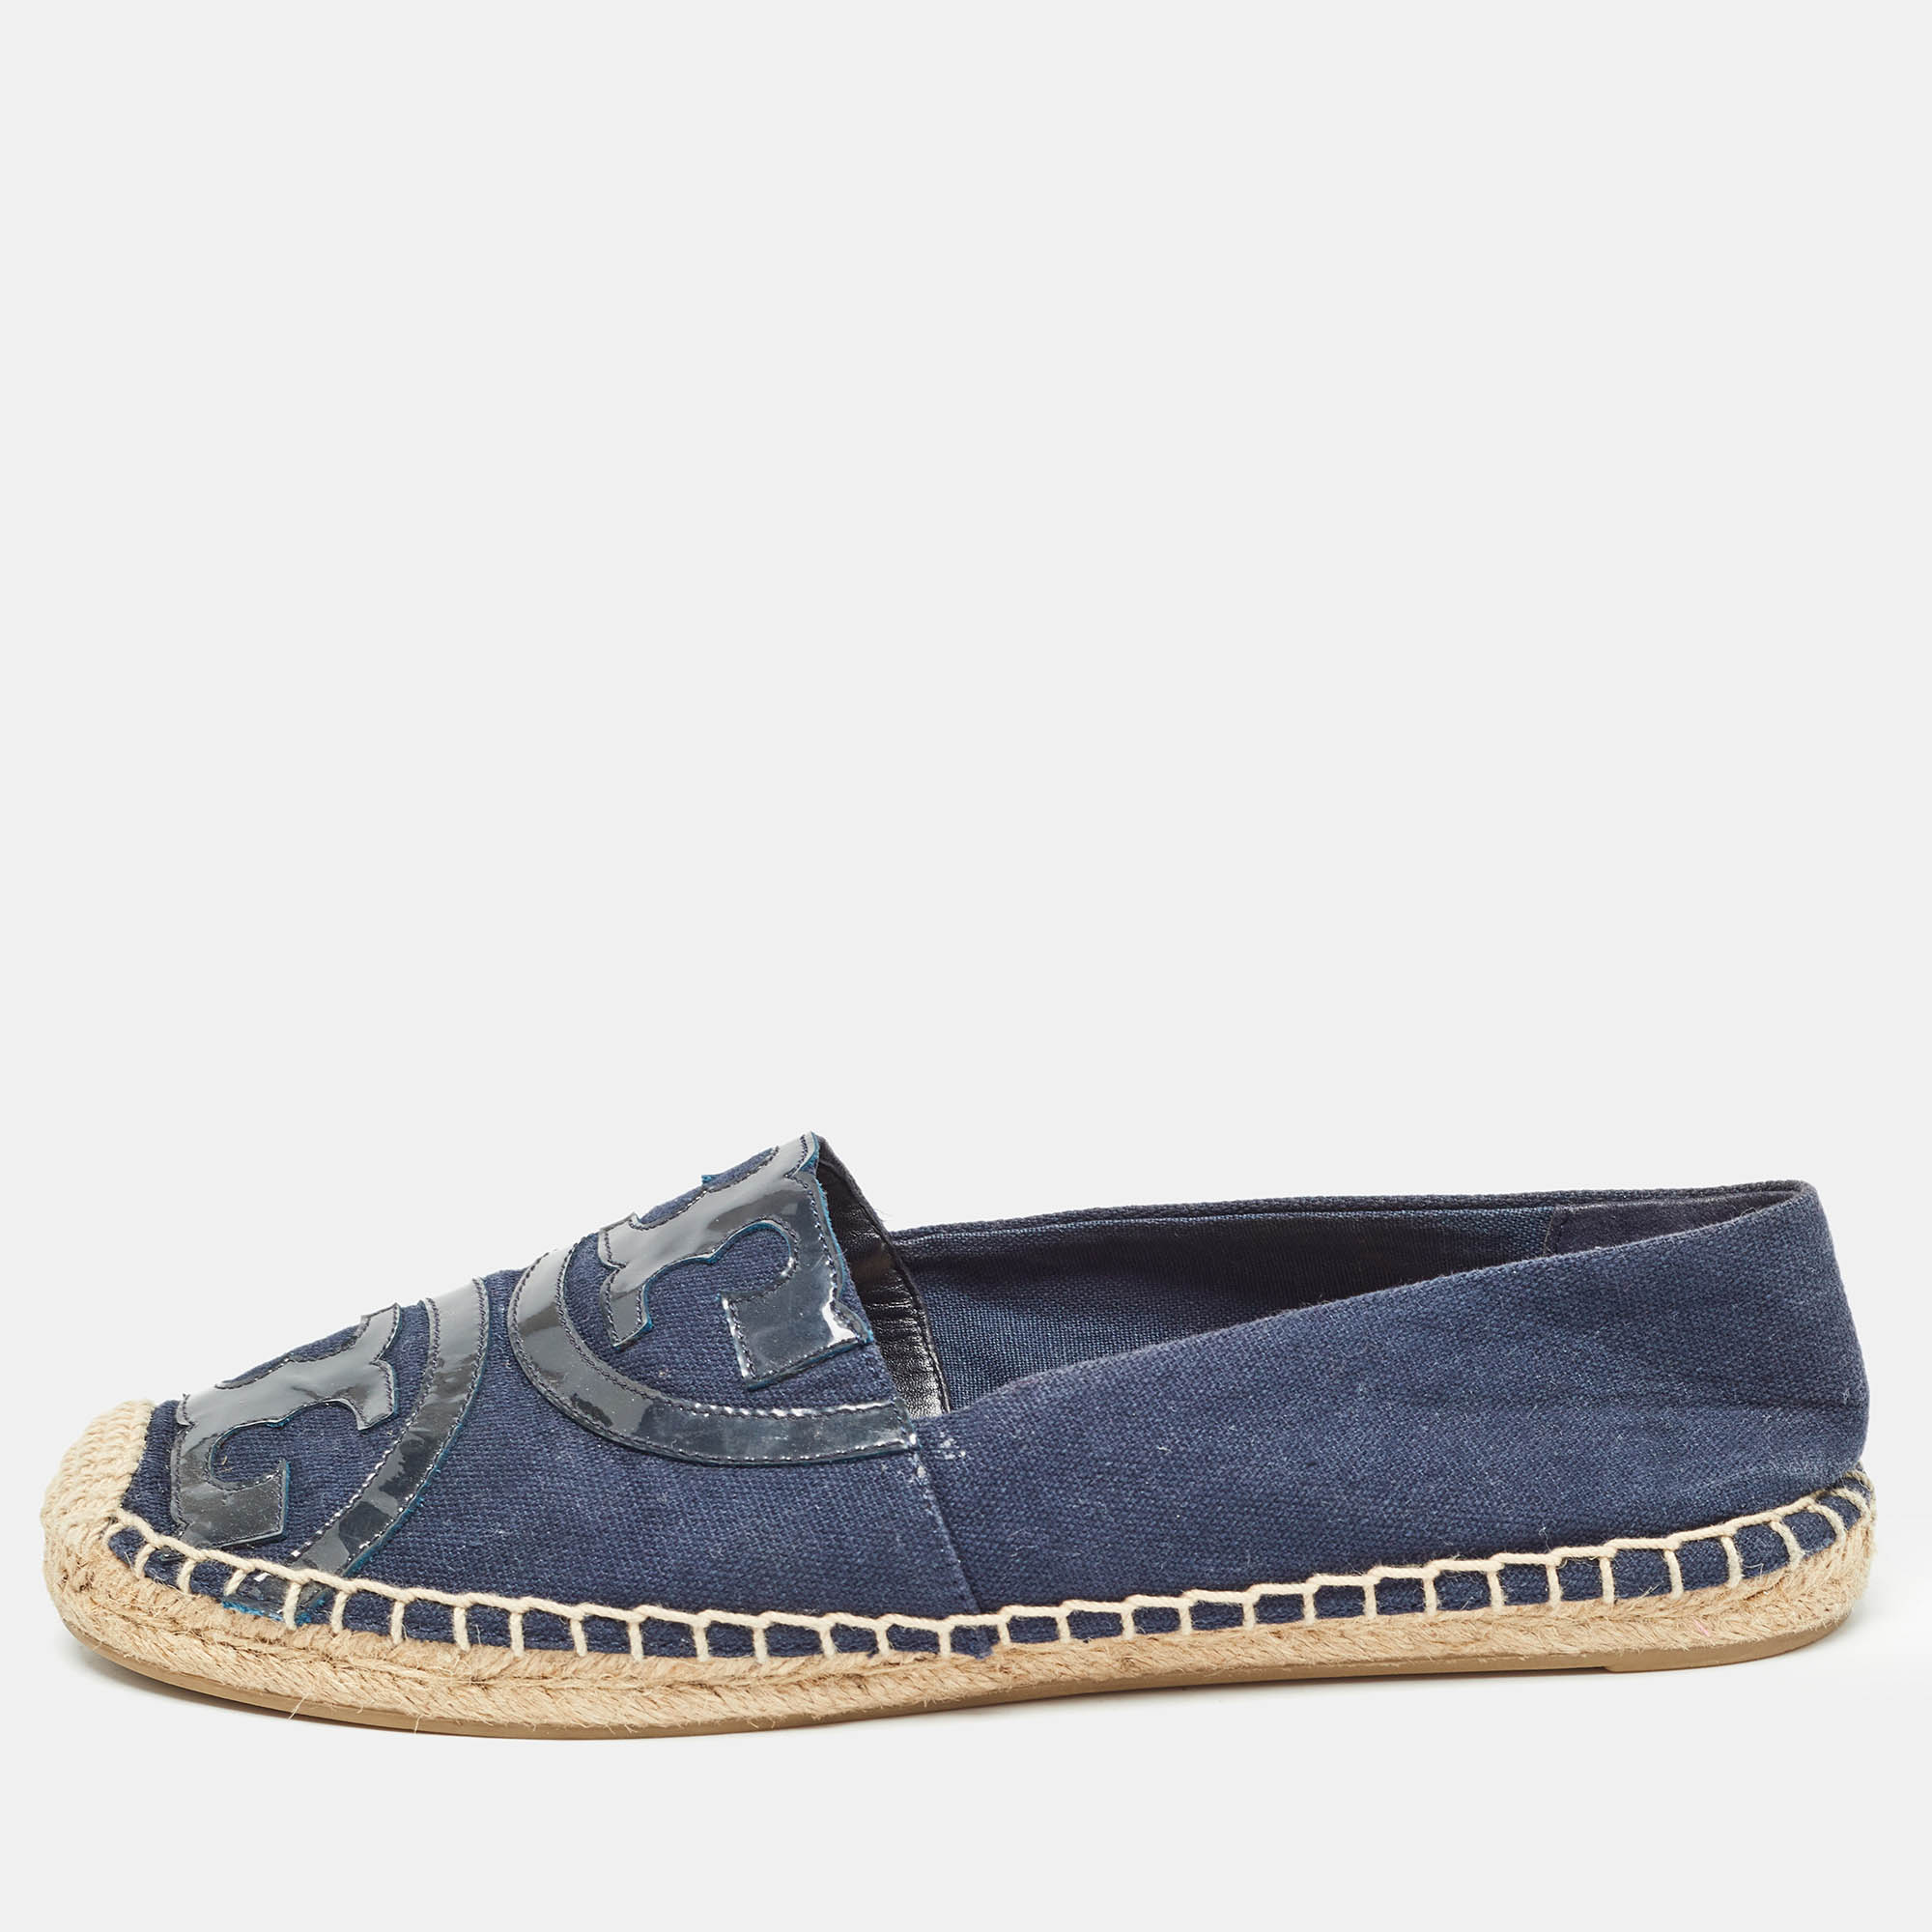 

Tory Burch Navy Blue Canvas and Patent Poppy Espadrilles Flats Size